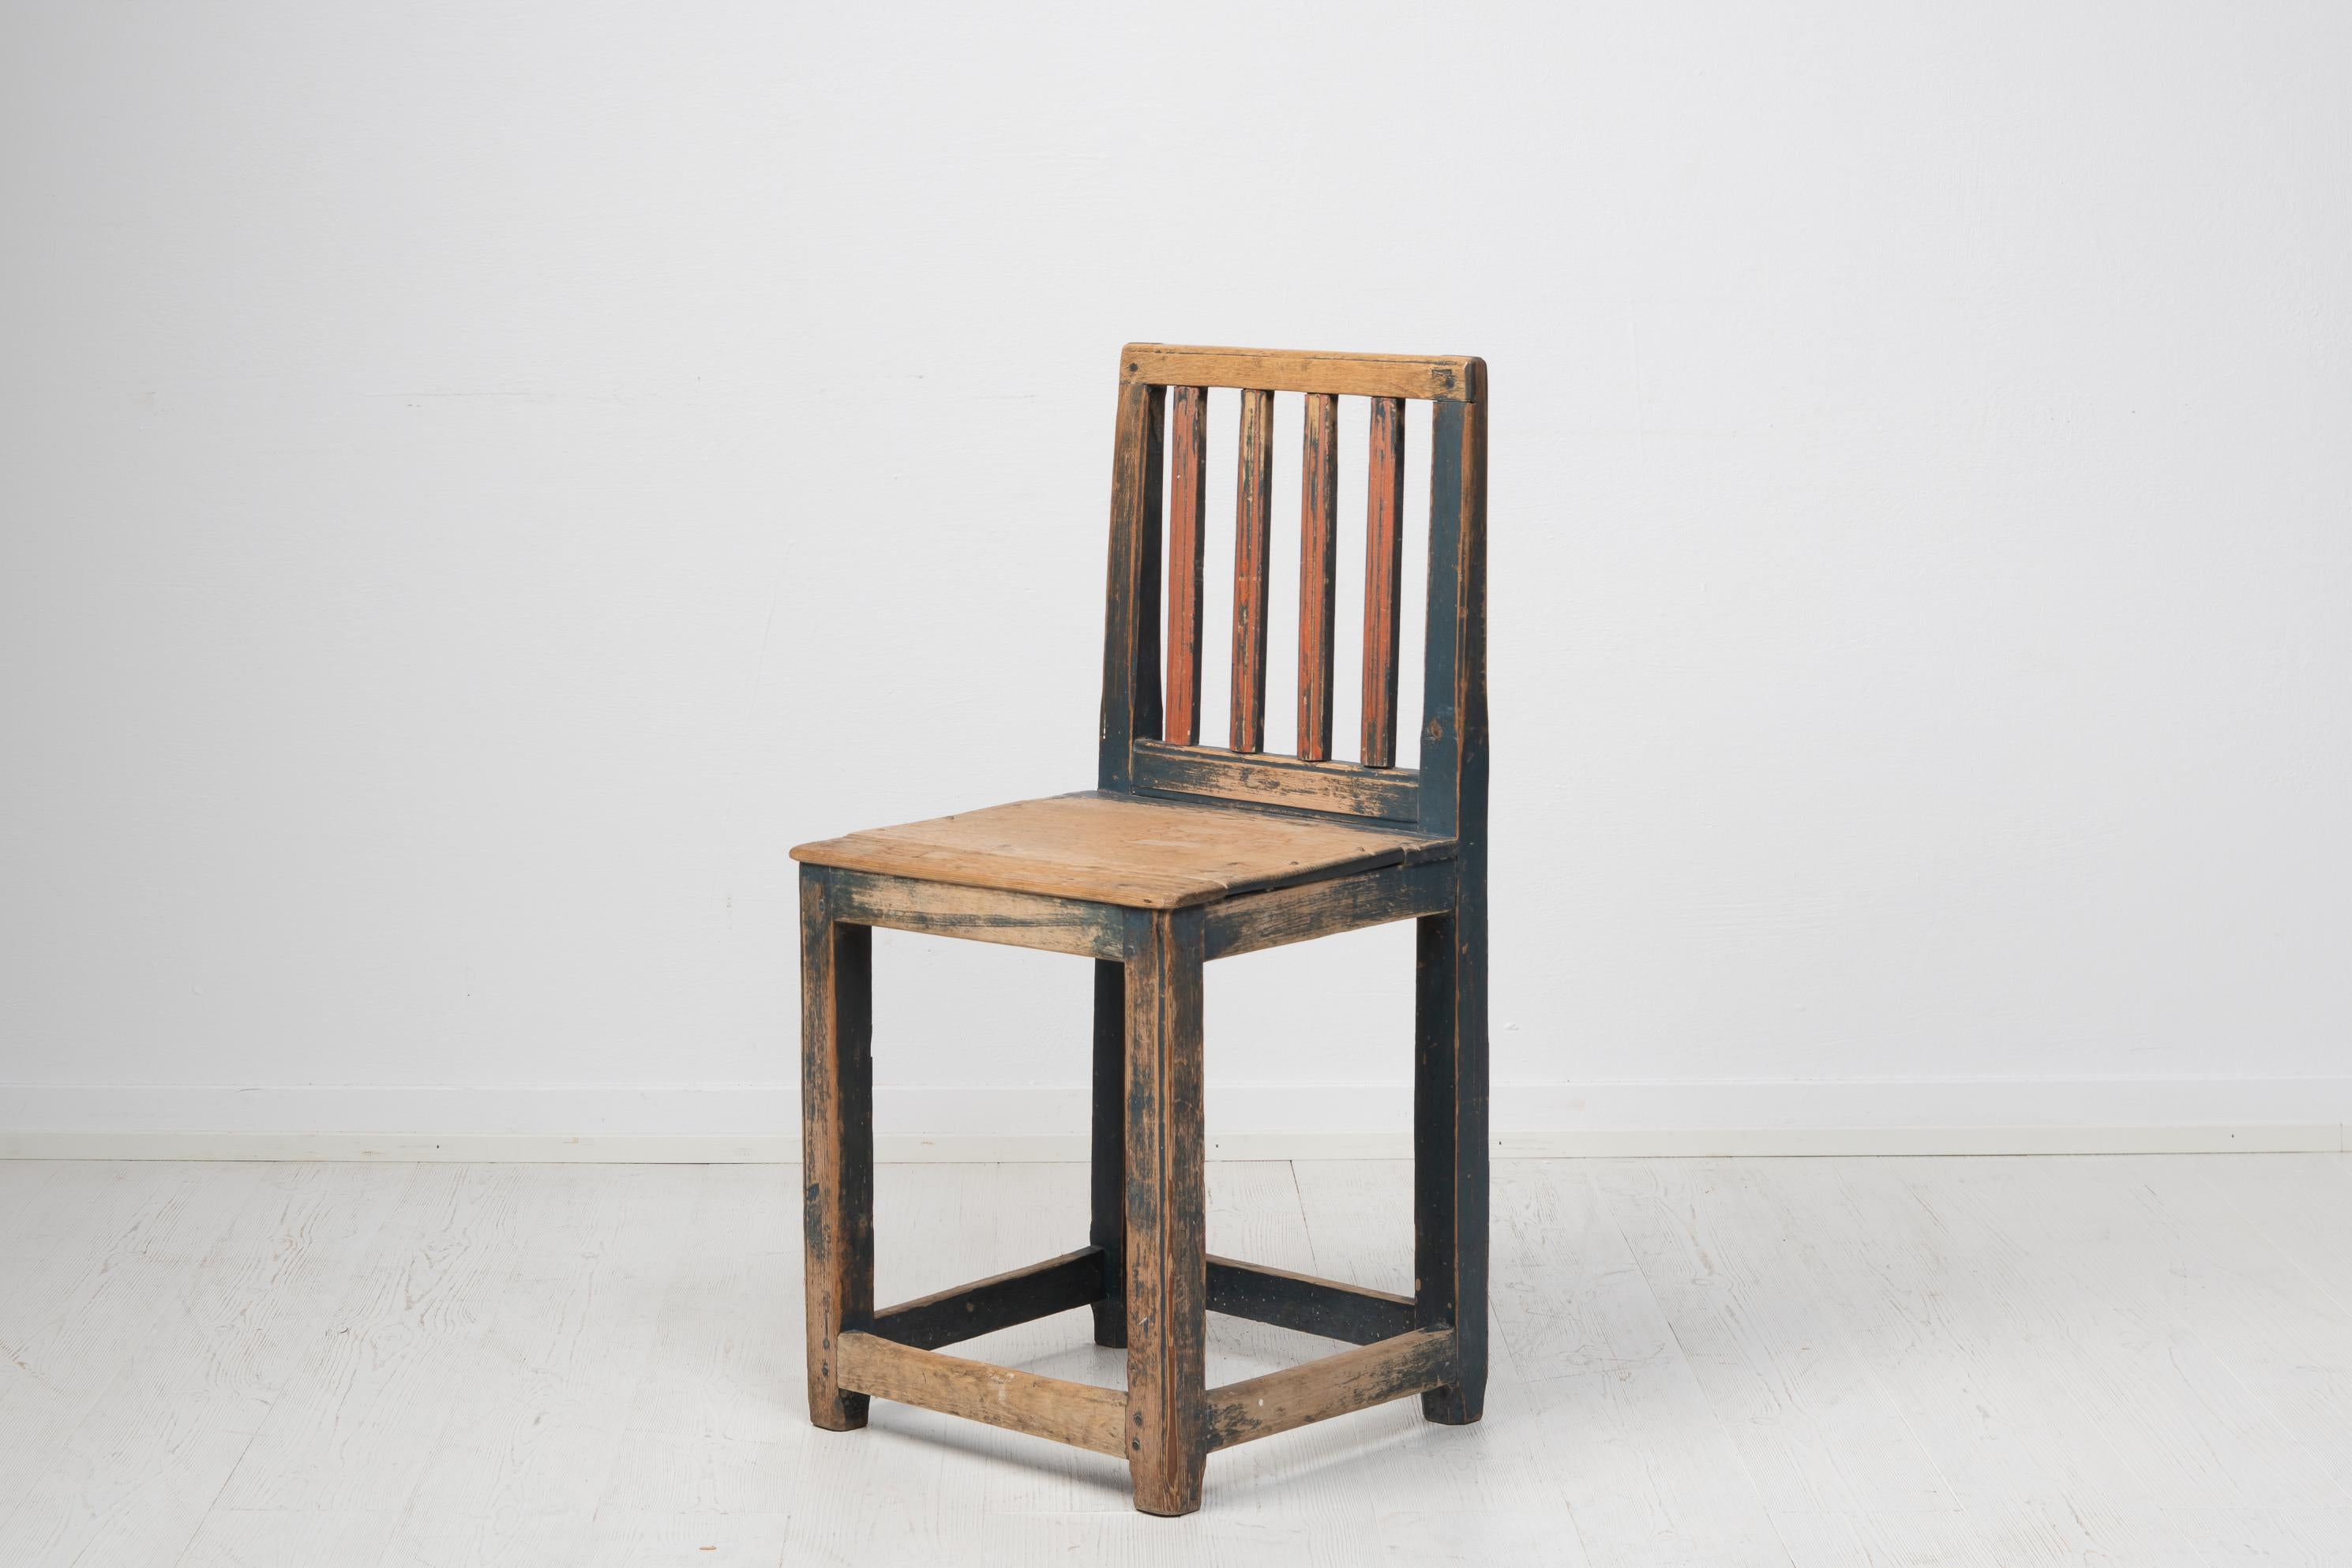 Charming Swedish folk art chair from Hälsingland in Sweden. The chair is made during the early 1800s in Swedish pine. It has the original paint which has become naturally distressed over the years. The distress is the result of 200 years of use